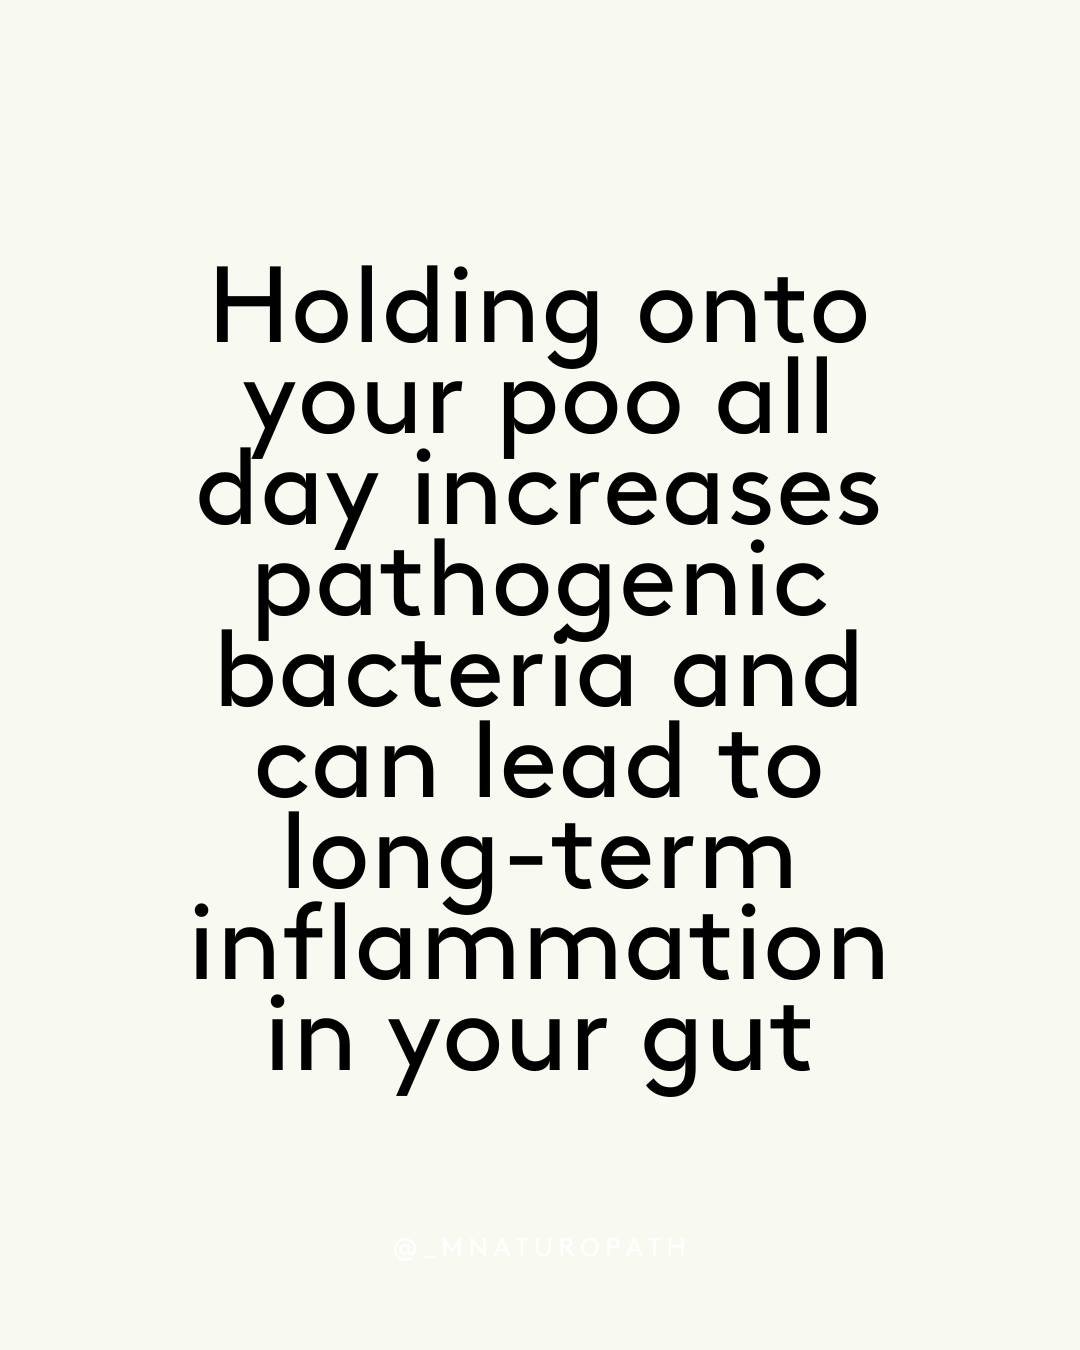 Did you know that holding onto your poo all day can increase bacteria in your gut and lead to long-term inflammation?

Regular bowel movements are essential for maintaining a healthy gut. However, holding onto our poo for extended periods can cause a